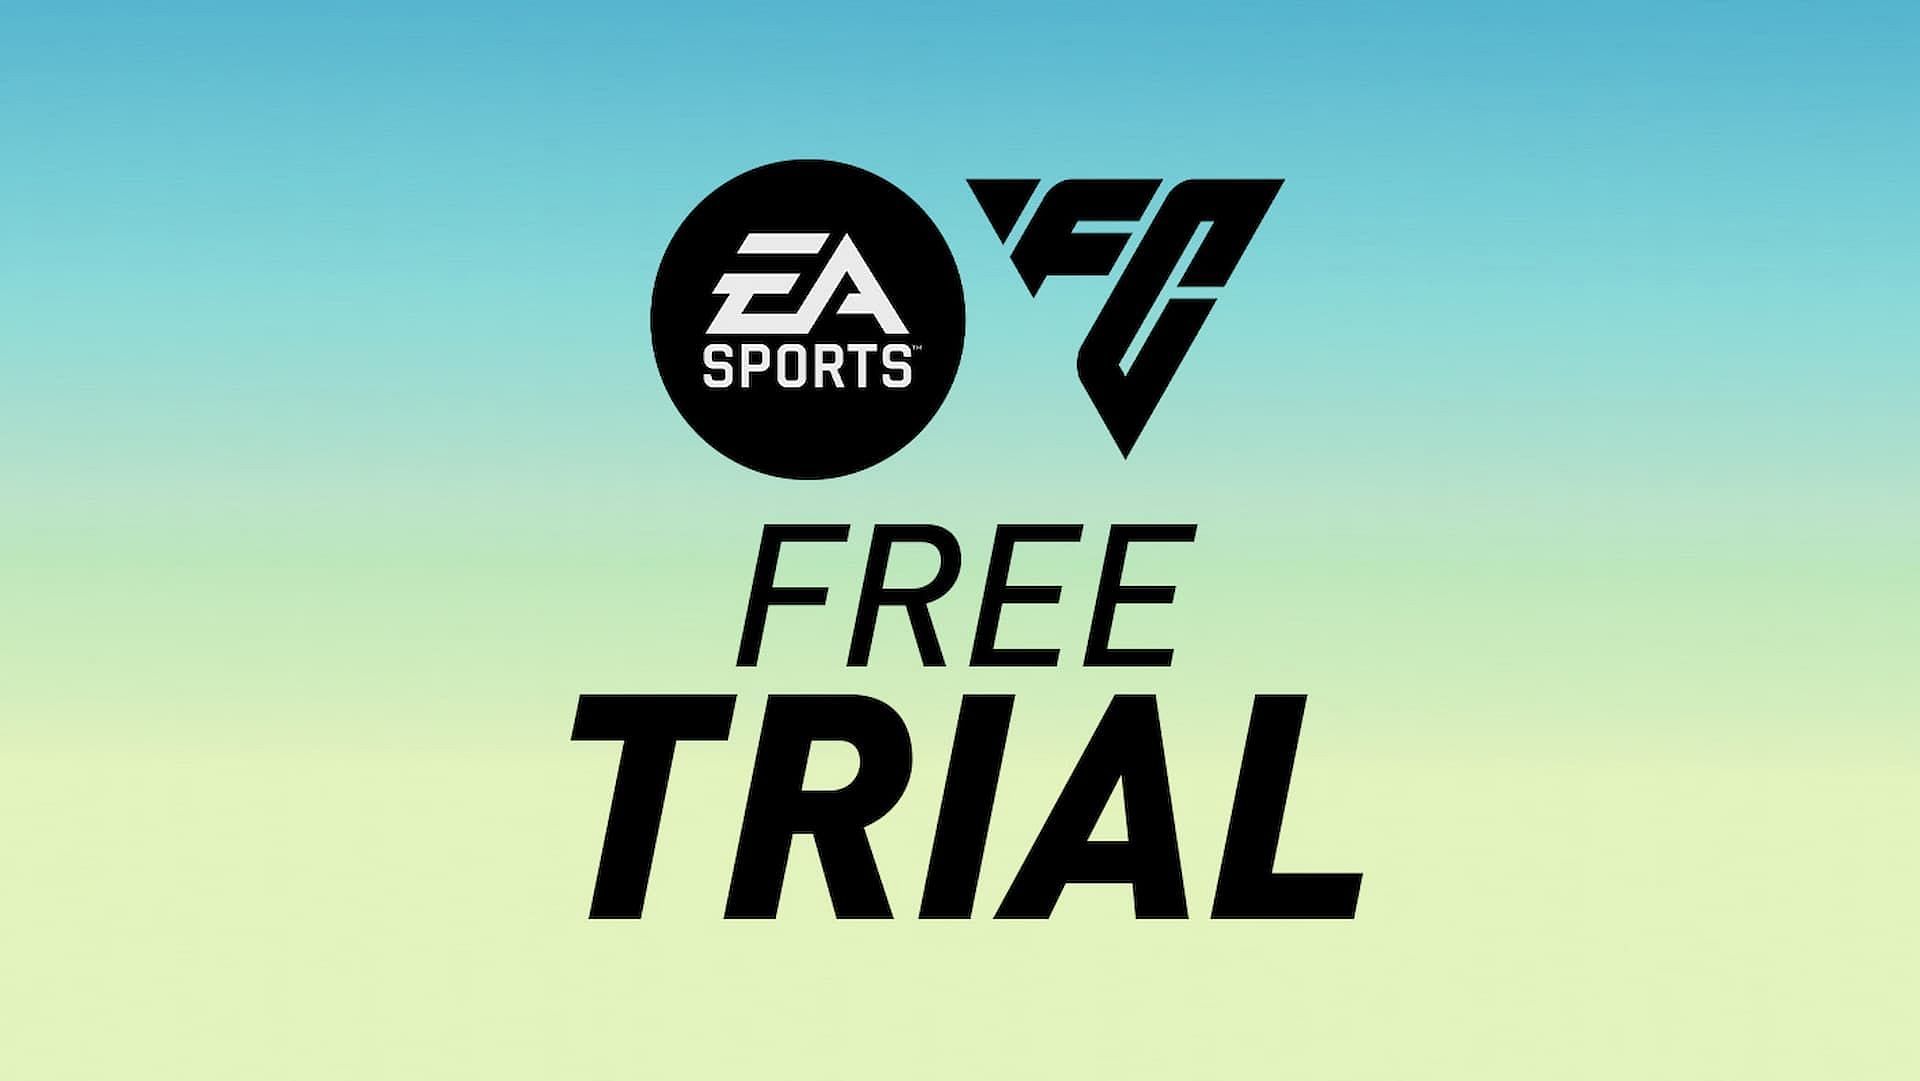 How to get 20 hours of FC 24 trial for free